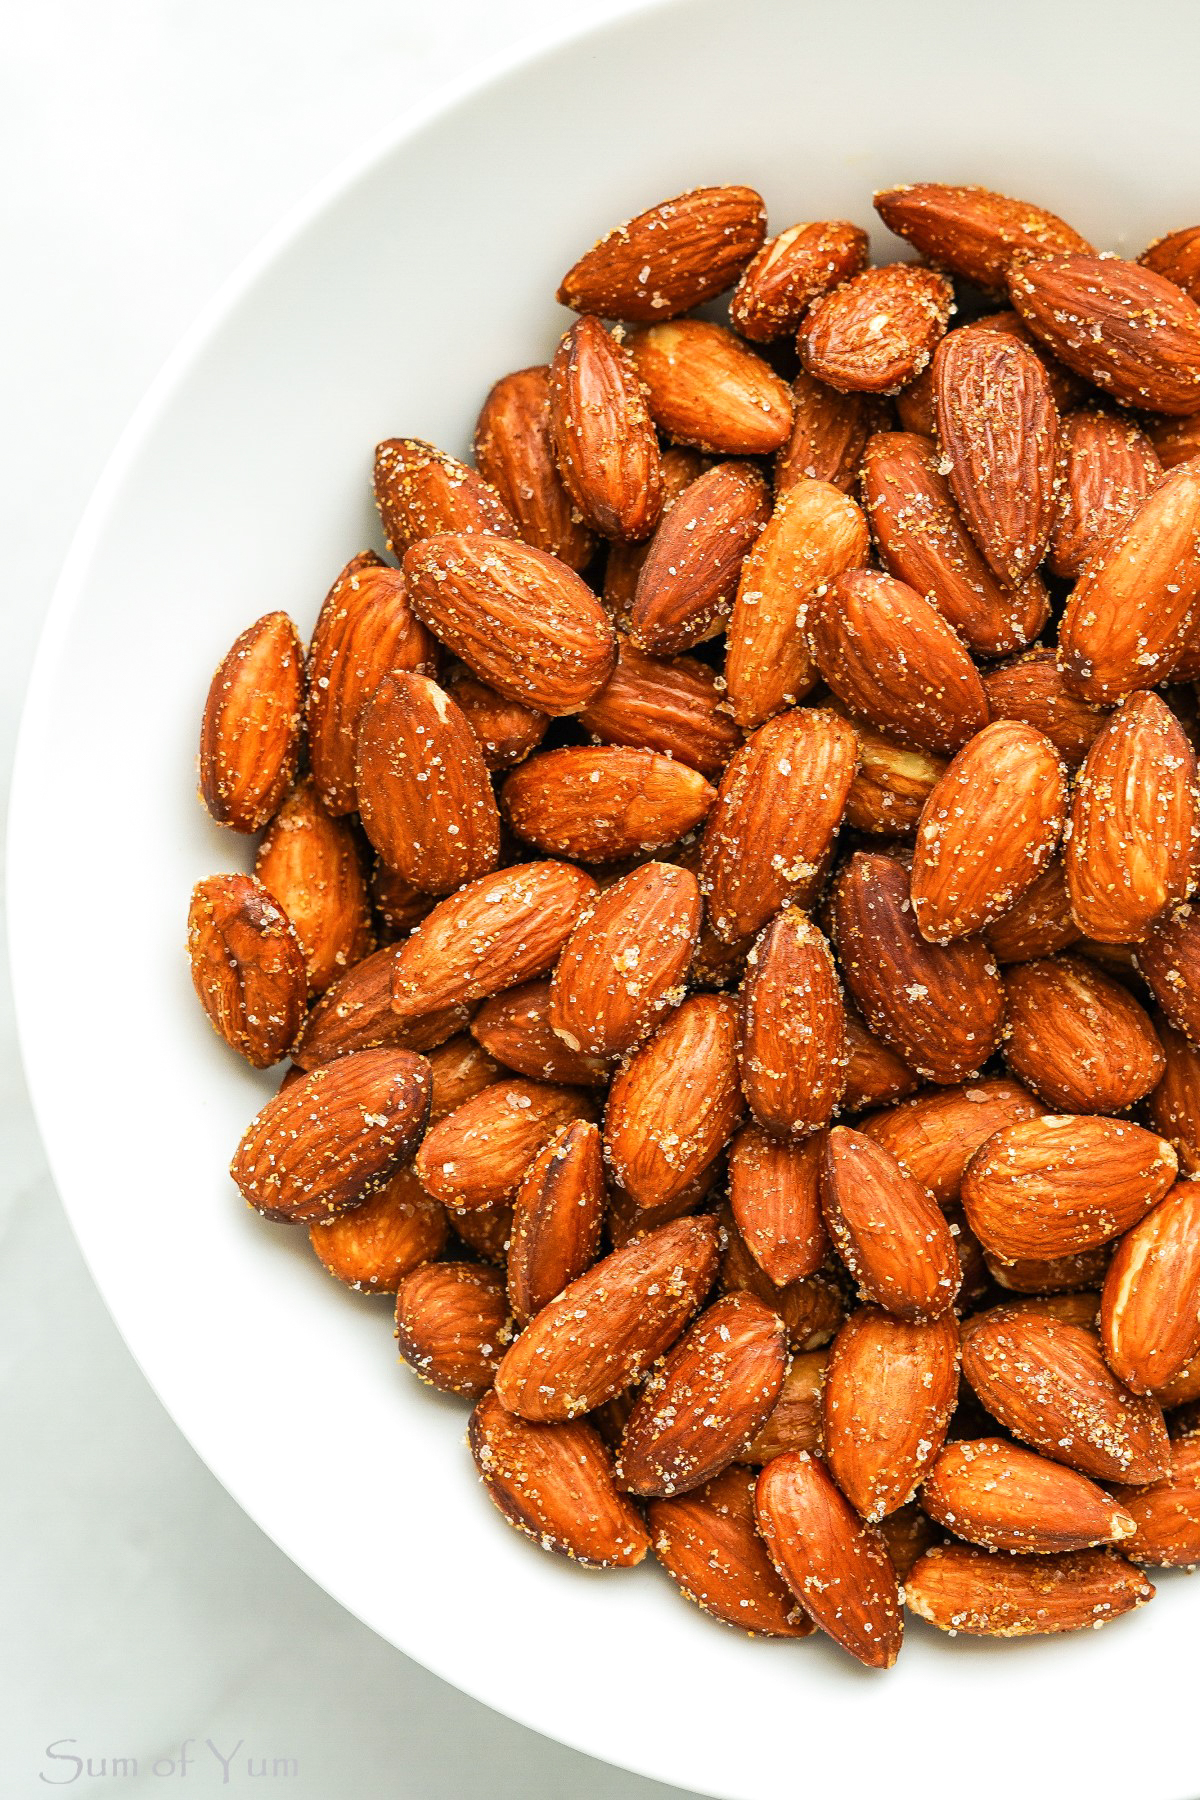 Almonds & Nuts